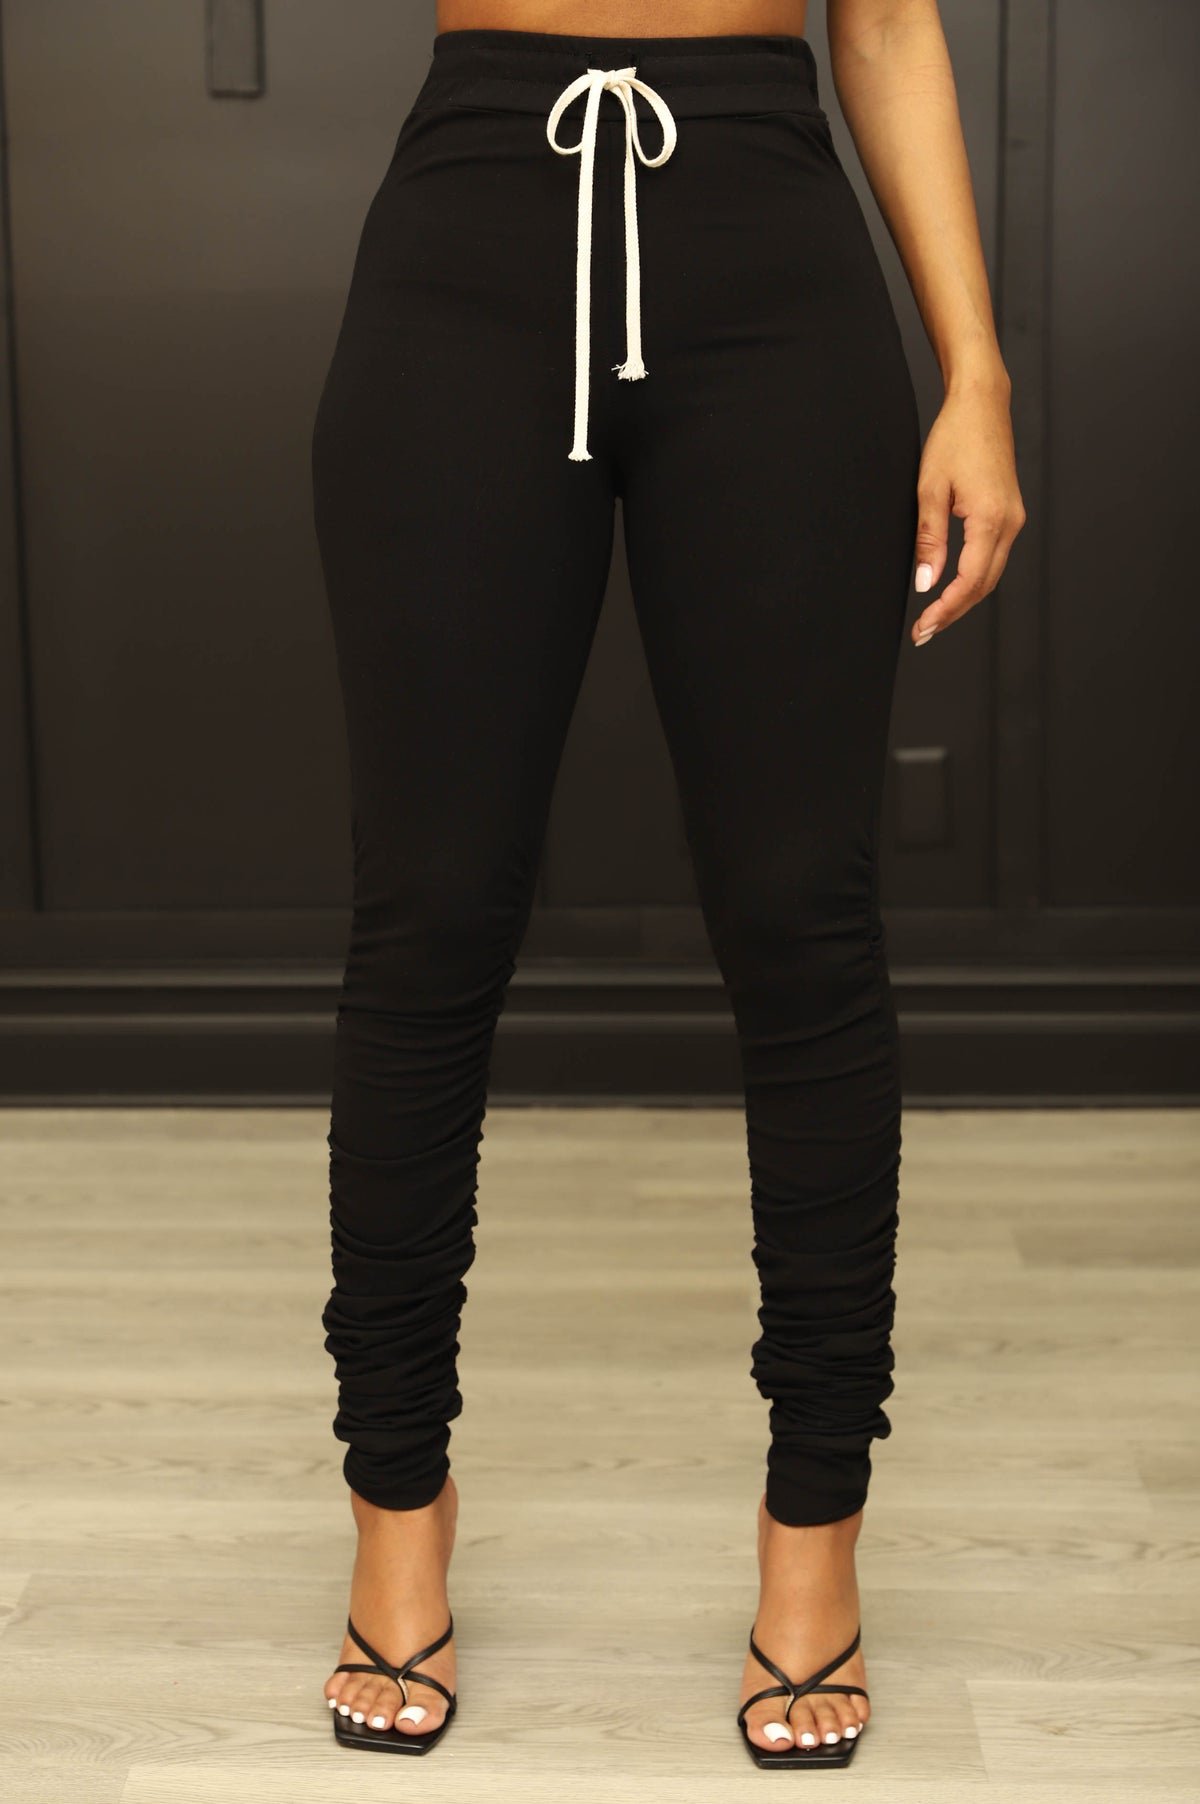 
              Now Or Never Ruched Leggings - Black - Swank A Posh
            